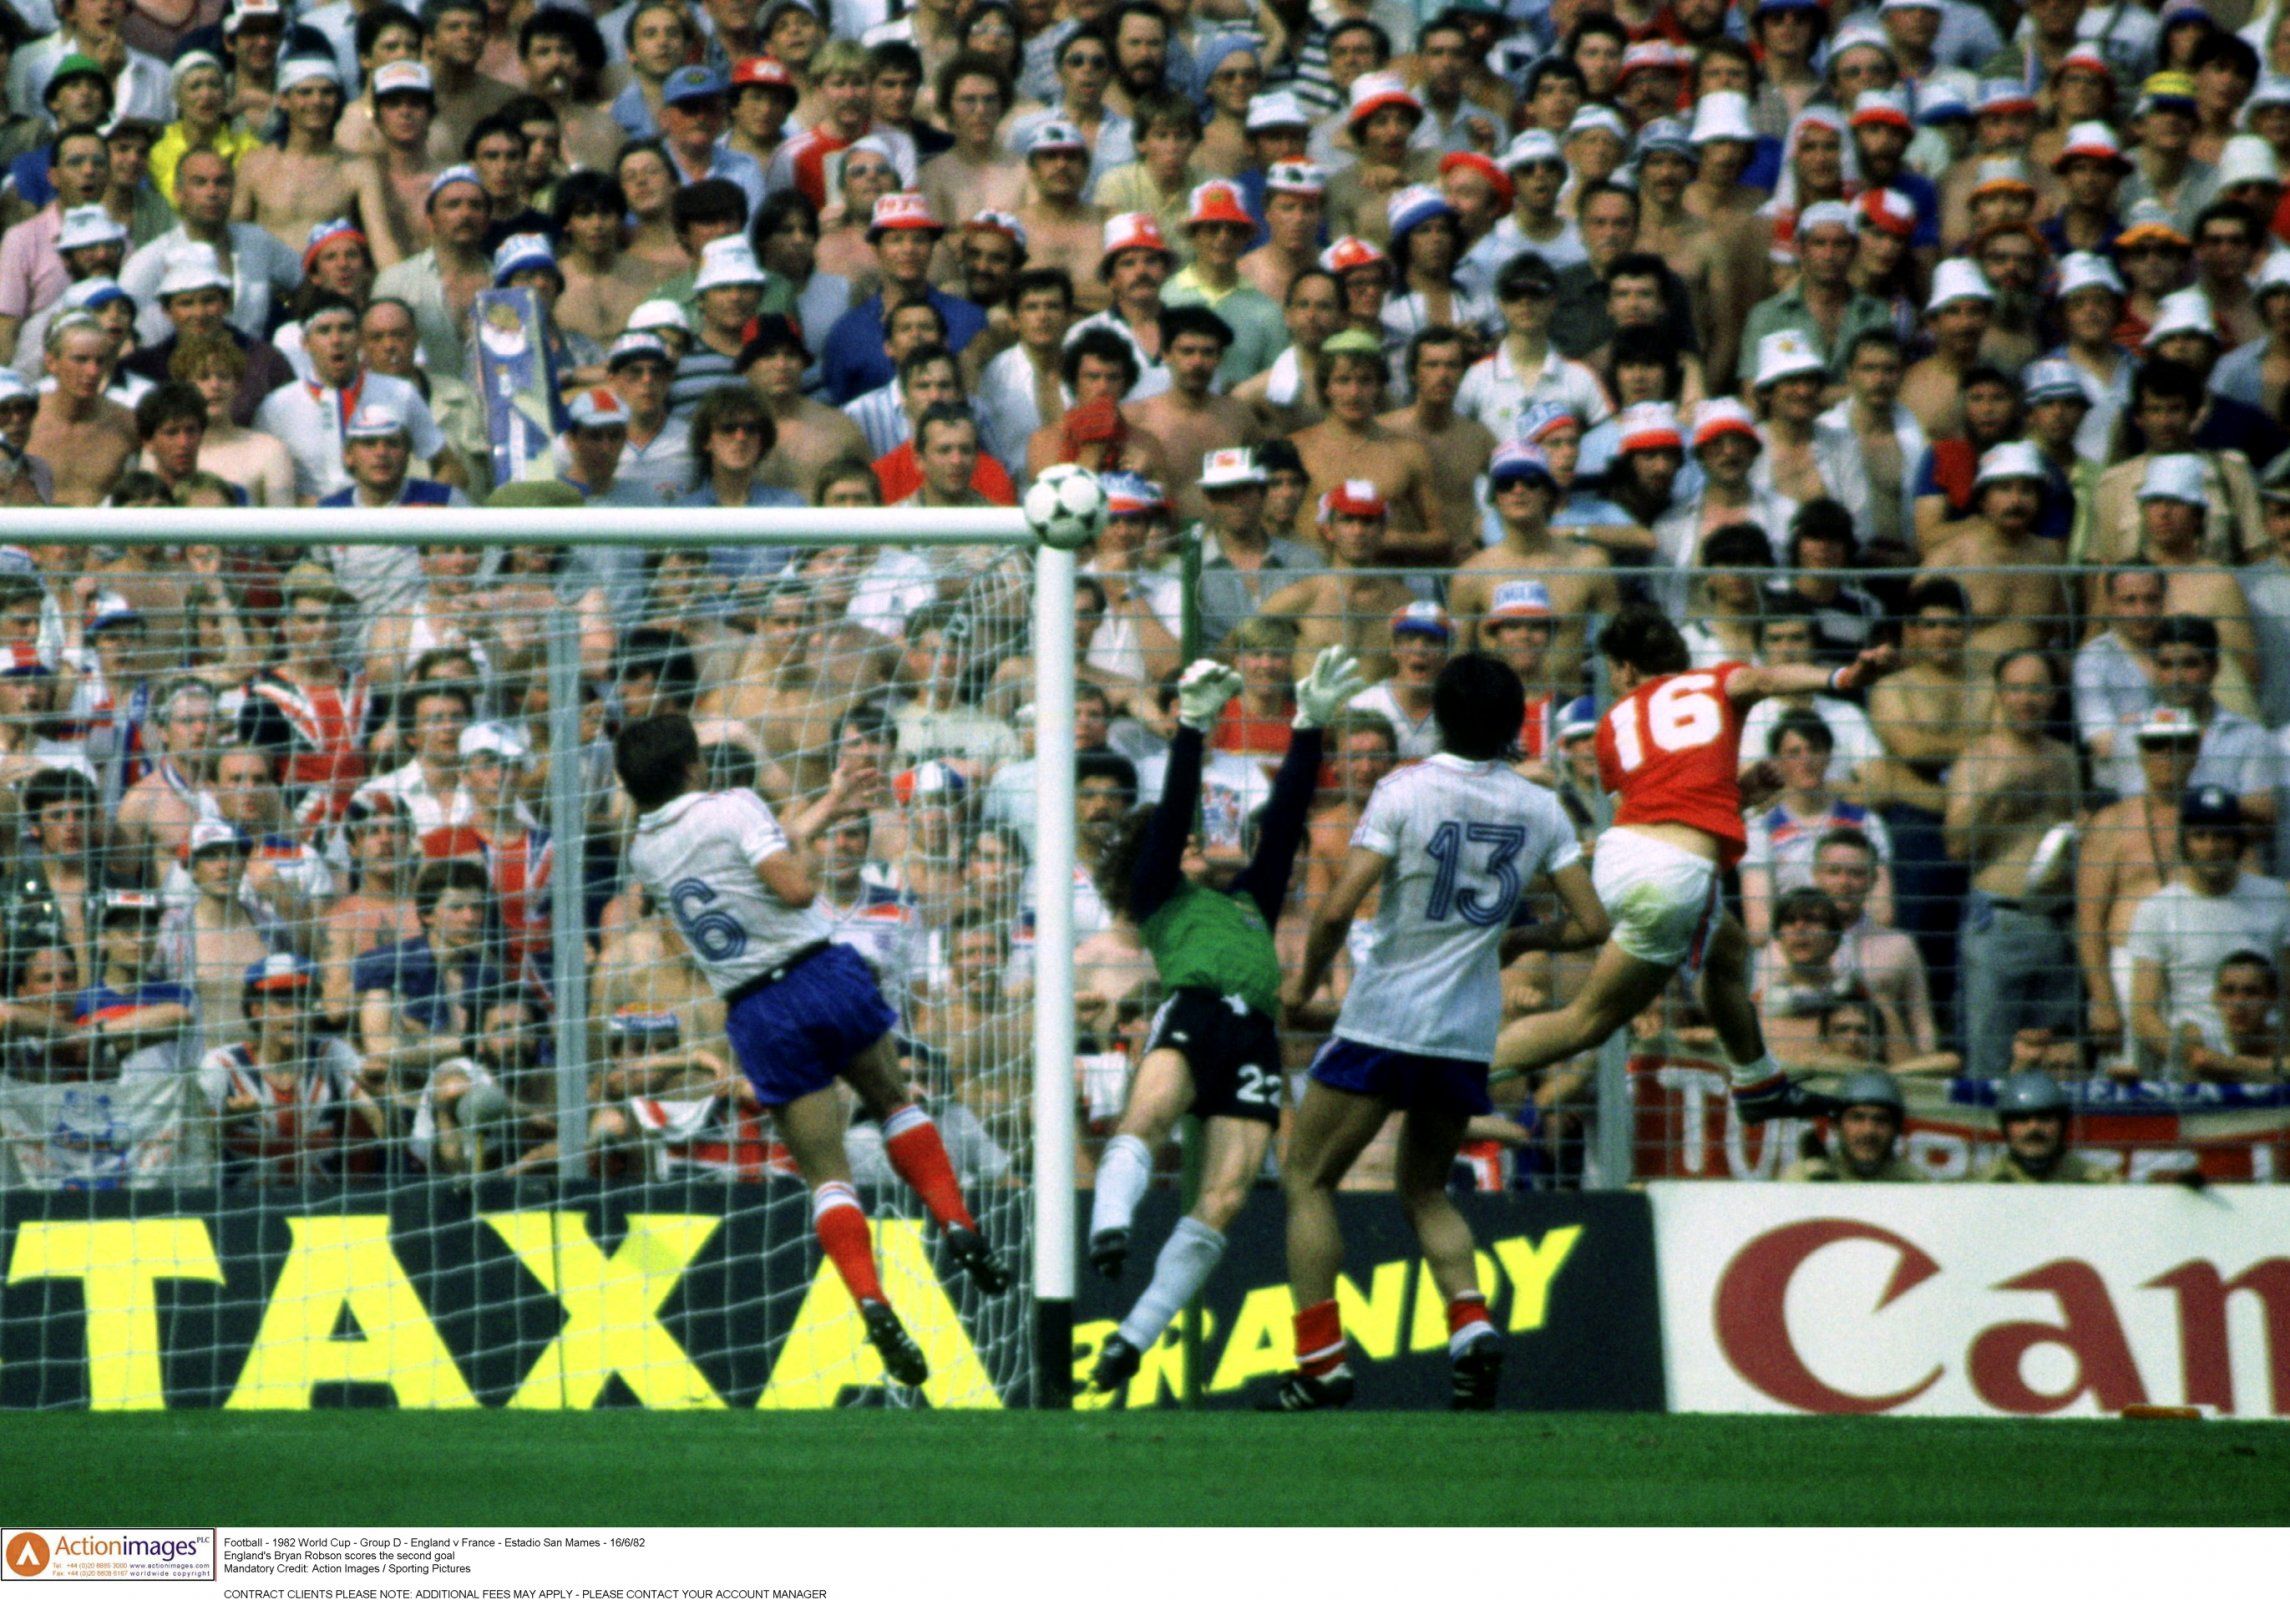 Bryan Robson scores against France